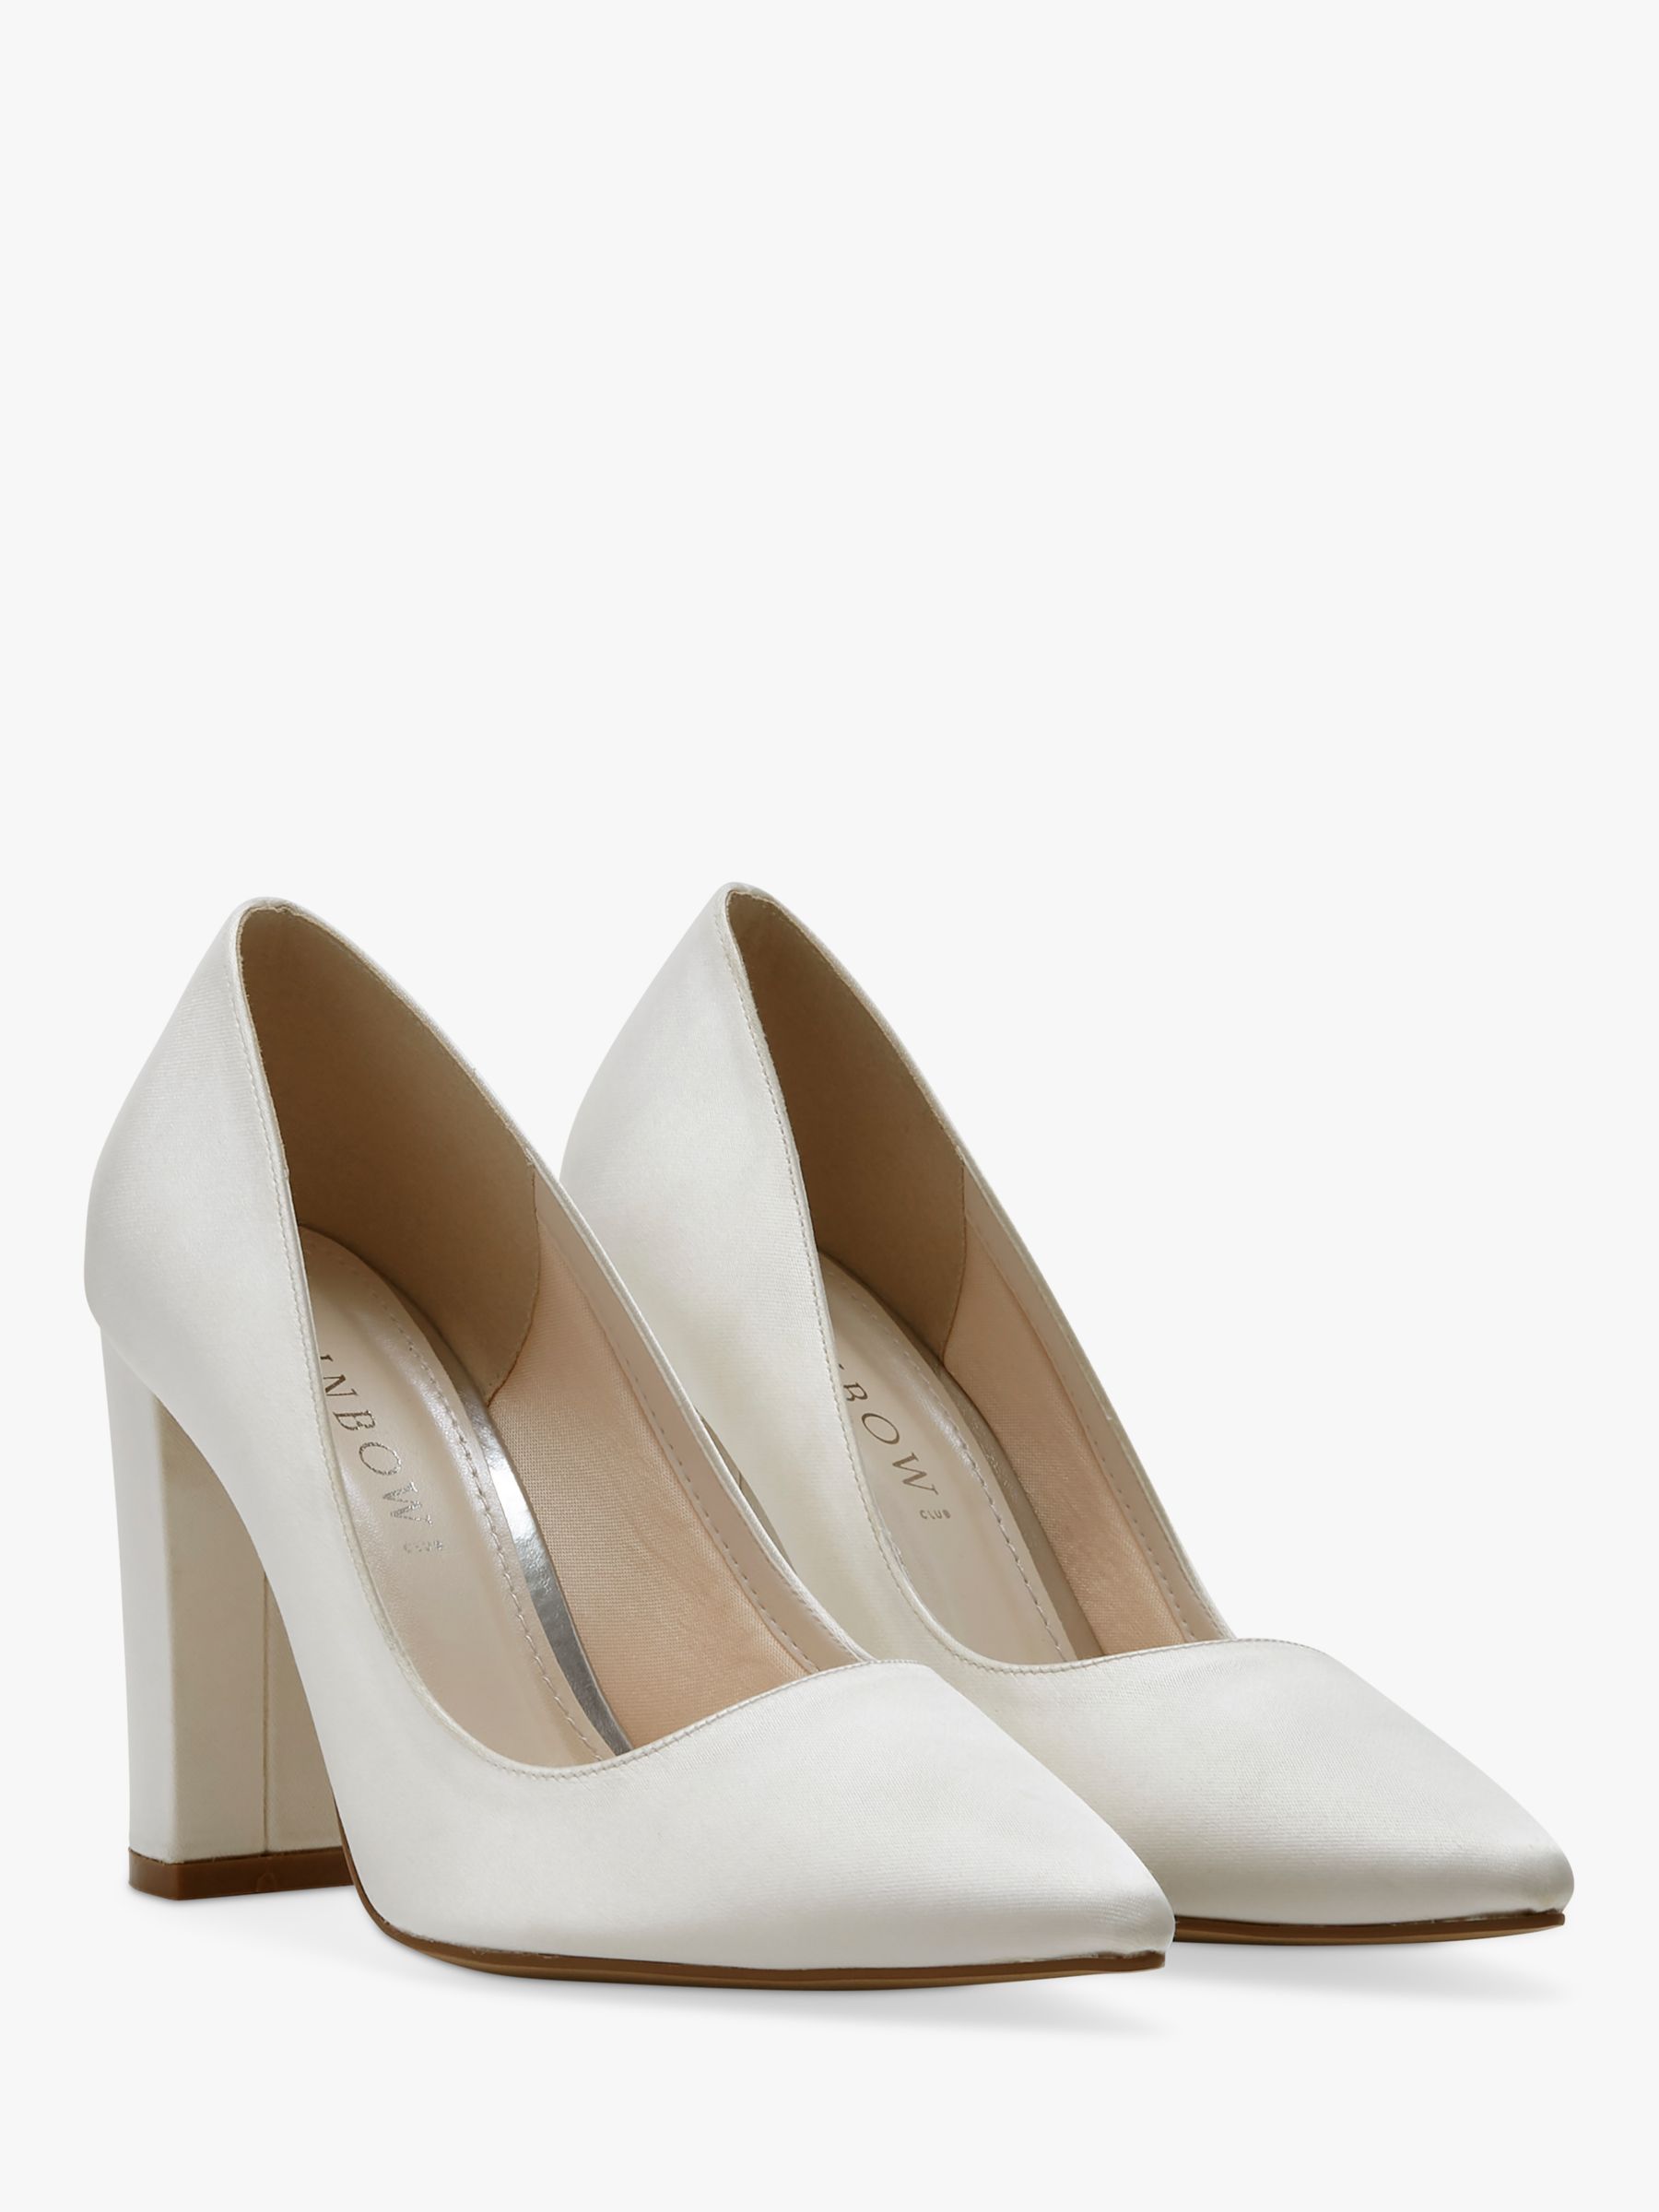 Rainbow Club Remi Wide Fit Wedding Court Shoes, Ivory Satin, 7